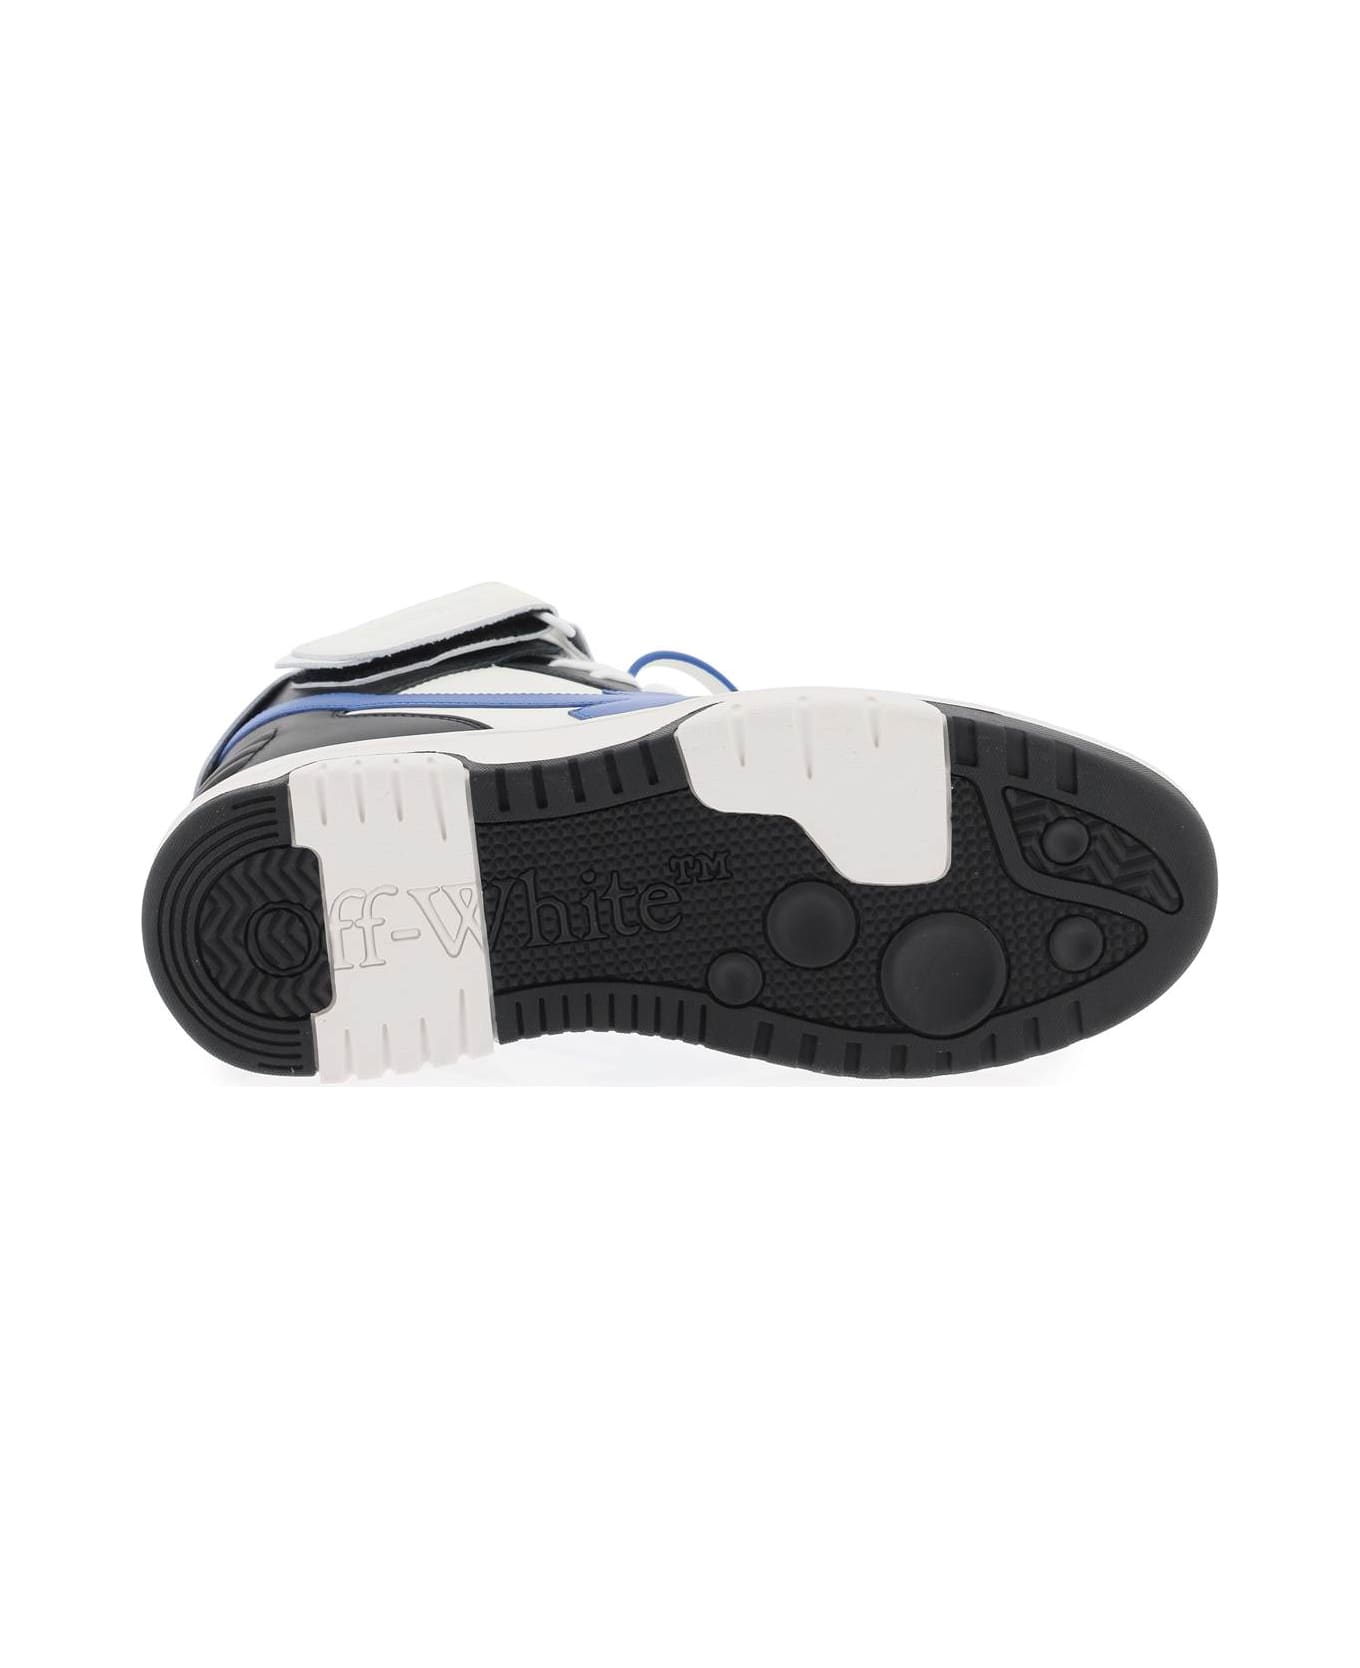 Off-White Out Of Office Sneakers - BLACK NAVY BLU (White) スニーカー